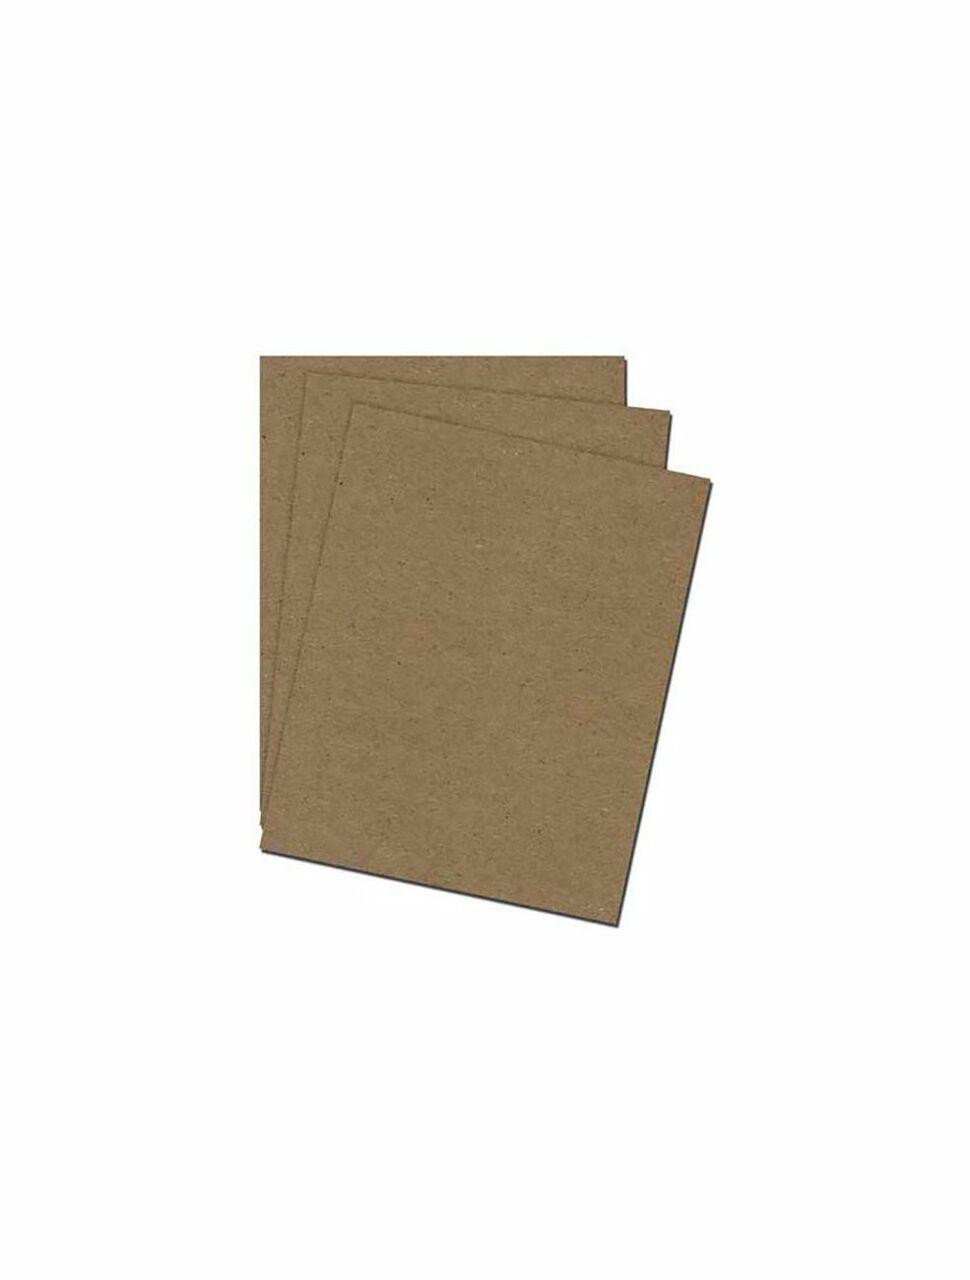 What Is Chipboard? - Fine Cardstock